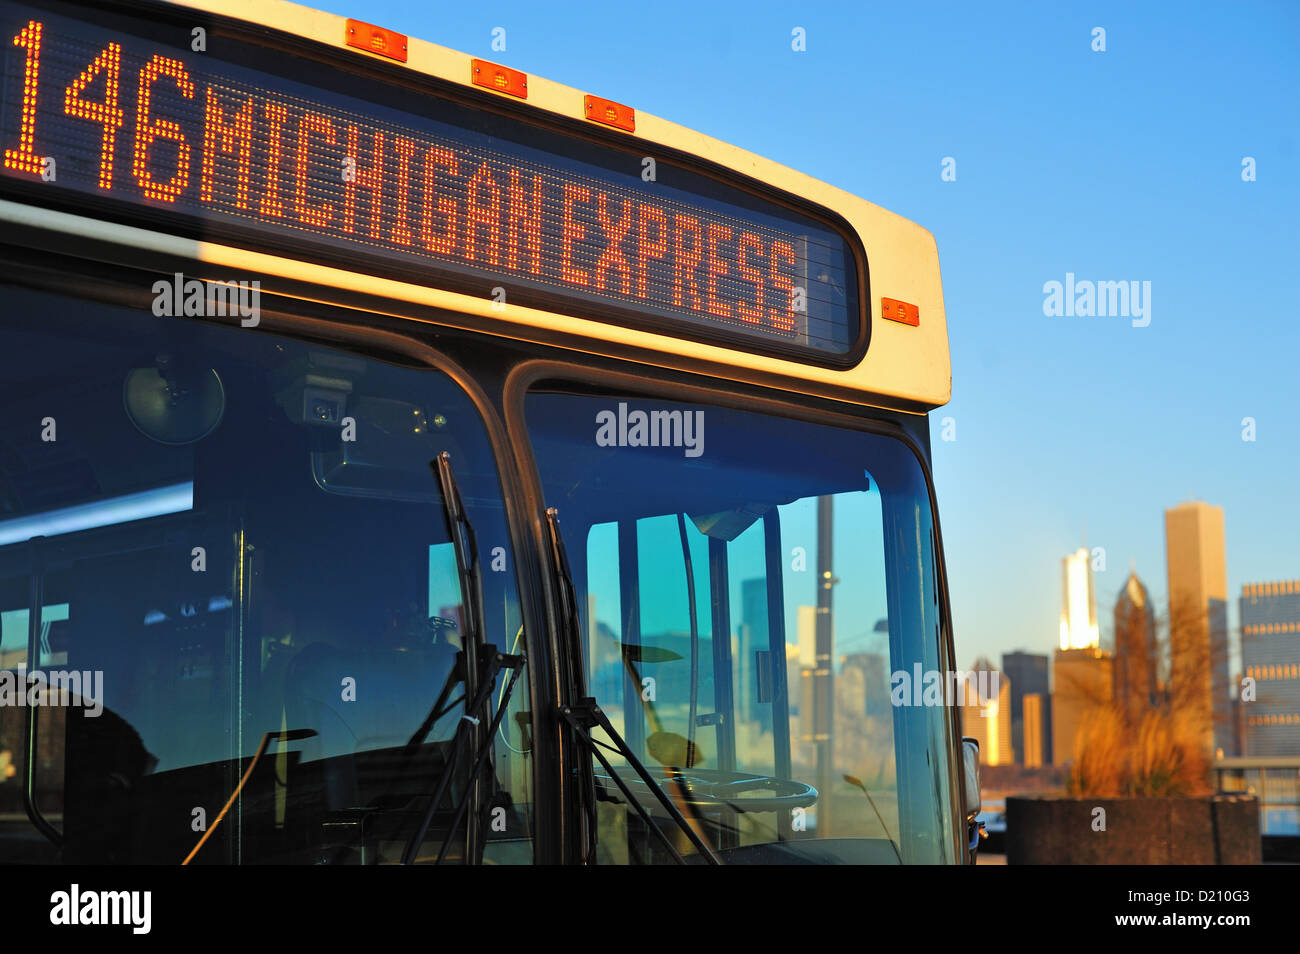 USA Illinois Chicago rising sun reflects off the front of a CTA bus Stock Photo